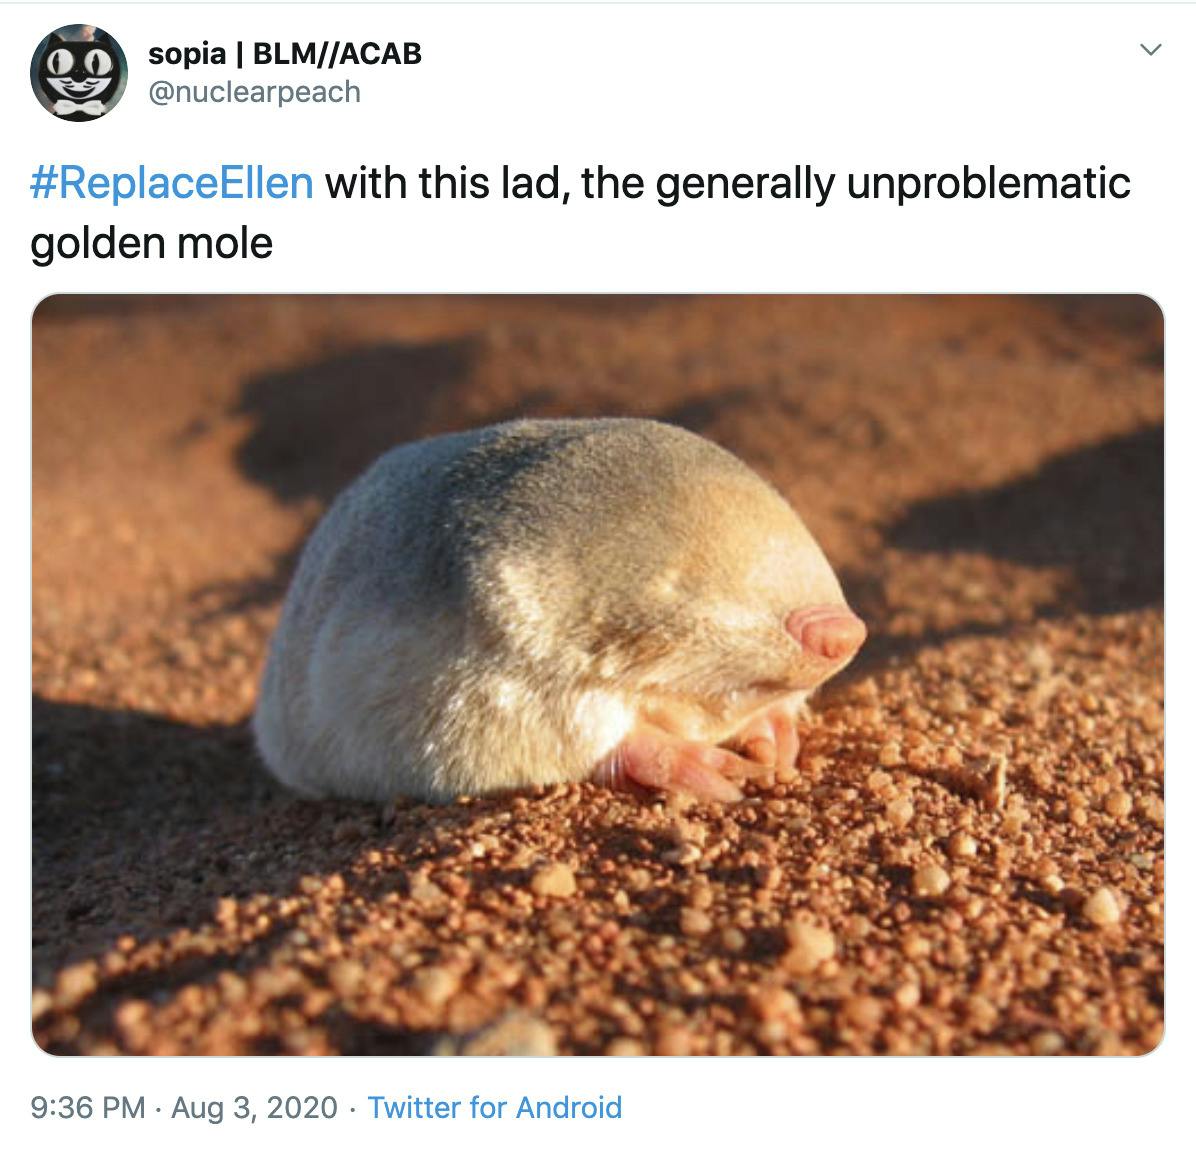 "#ReplaceEllen with this lad, the generally unproblematic golden mole" image of golden mole